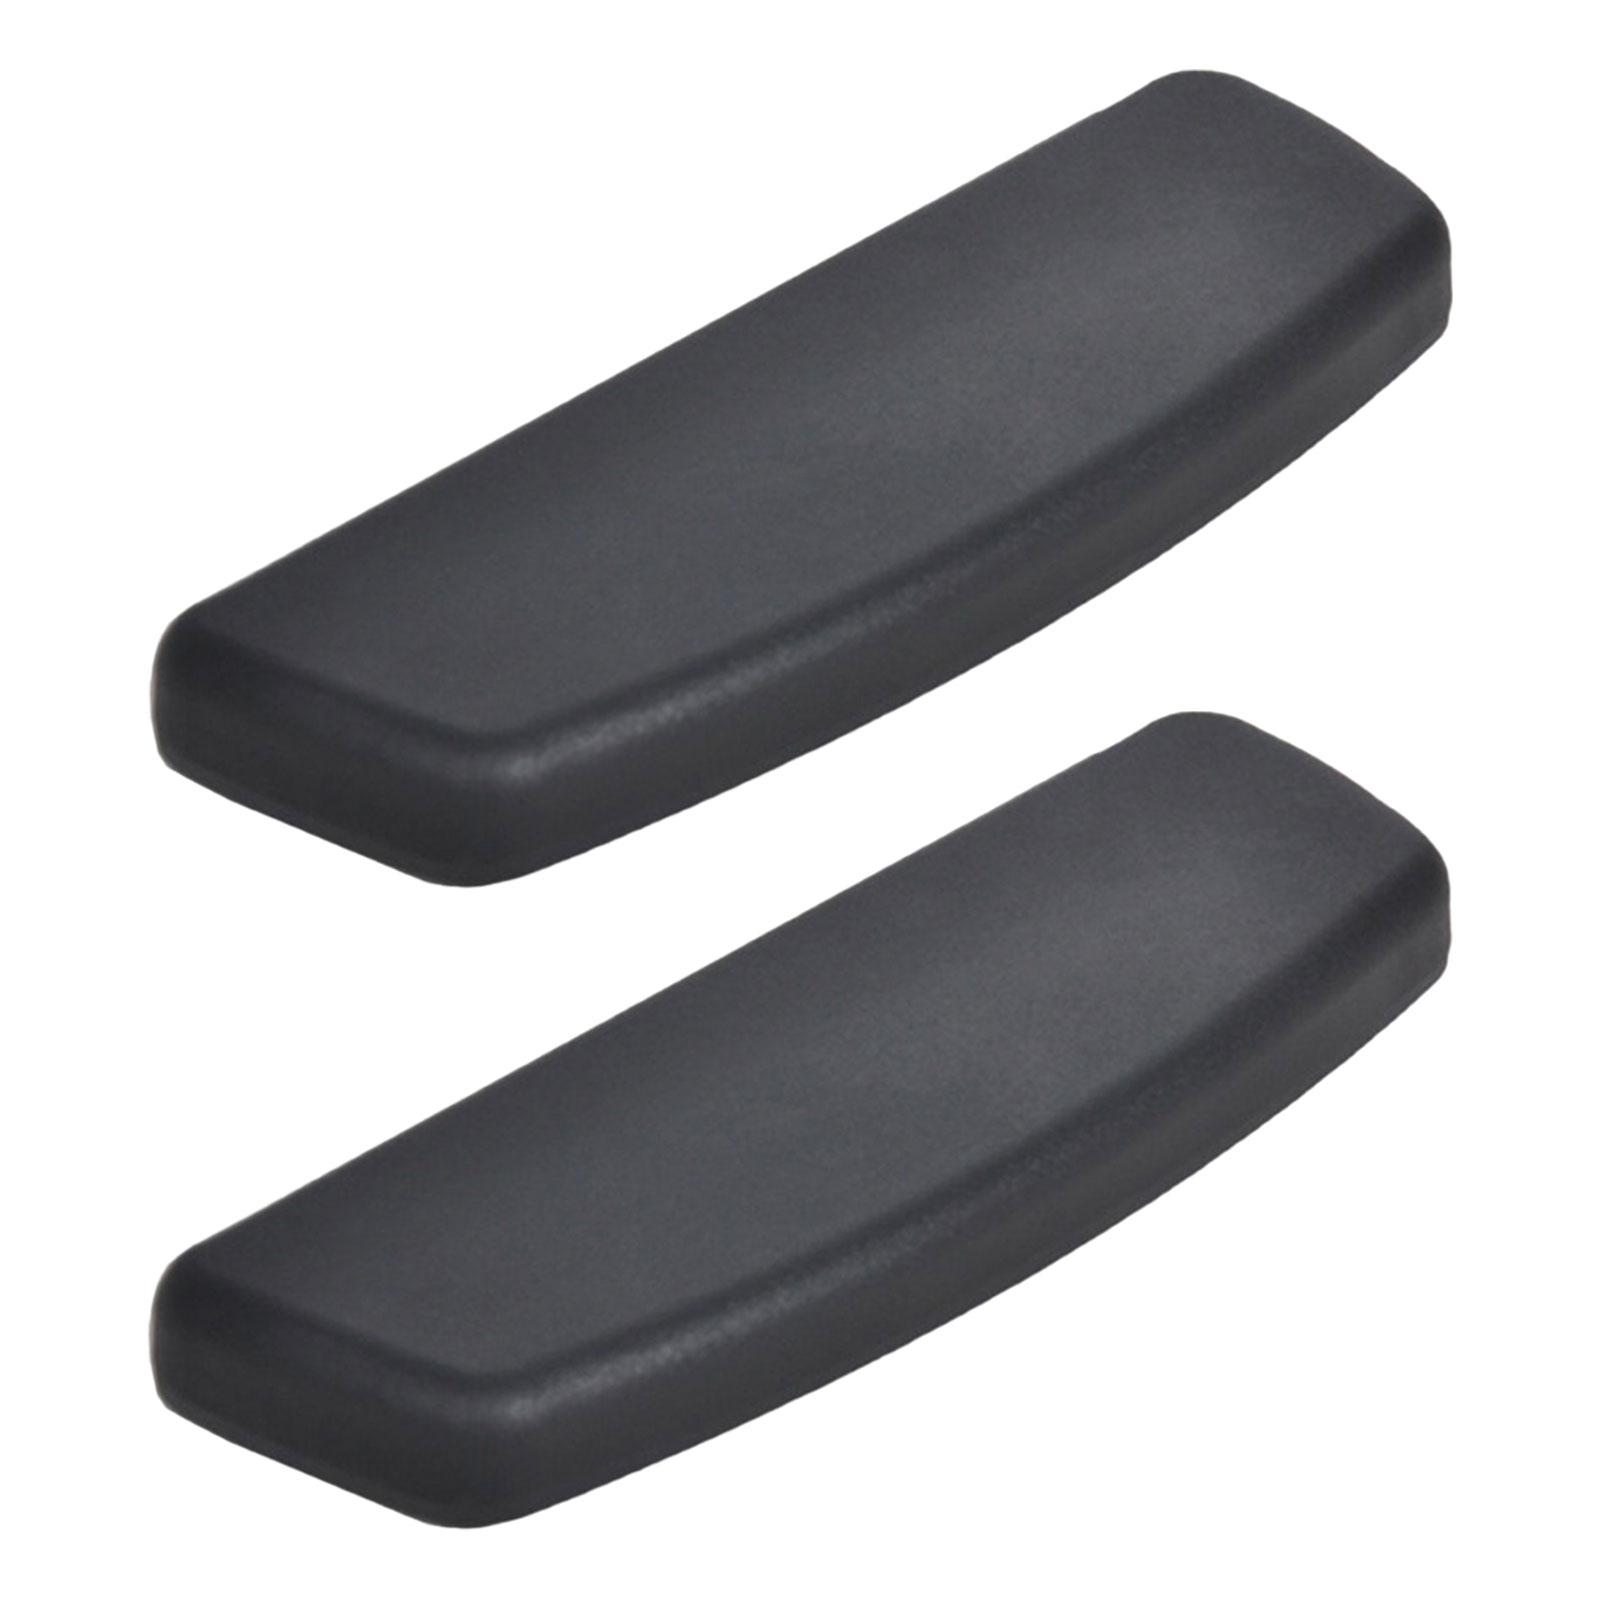 2 Pieces Office Chair Replacement Arm Pads, Office Chair Parts, Chair Arm Cushion Pad Gaming Chair Armrest Pads for Armchair - image 2 of 9